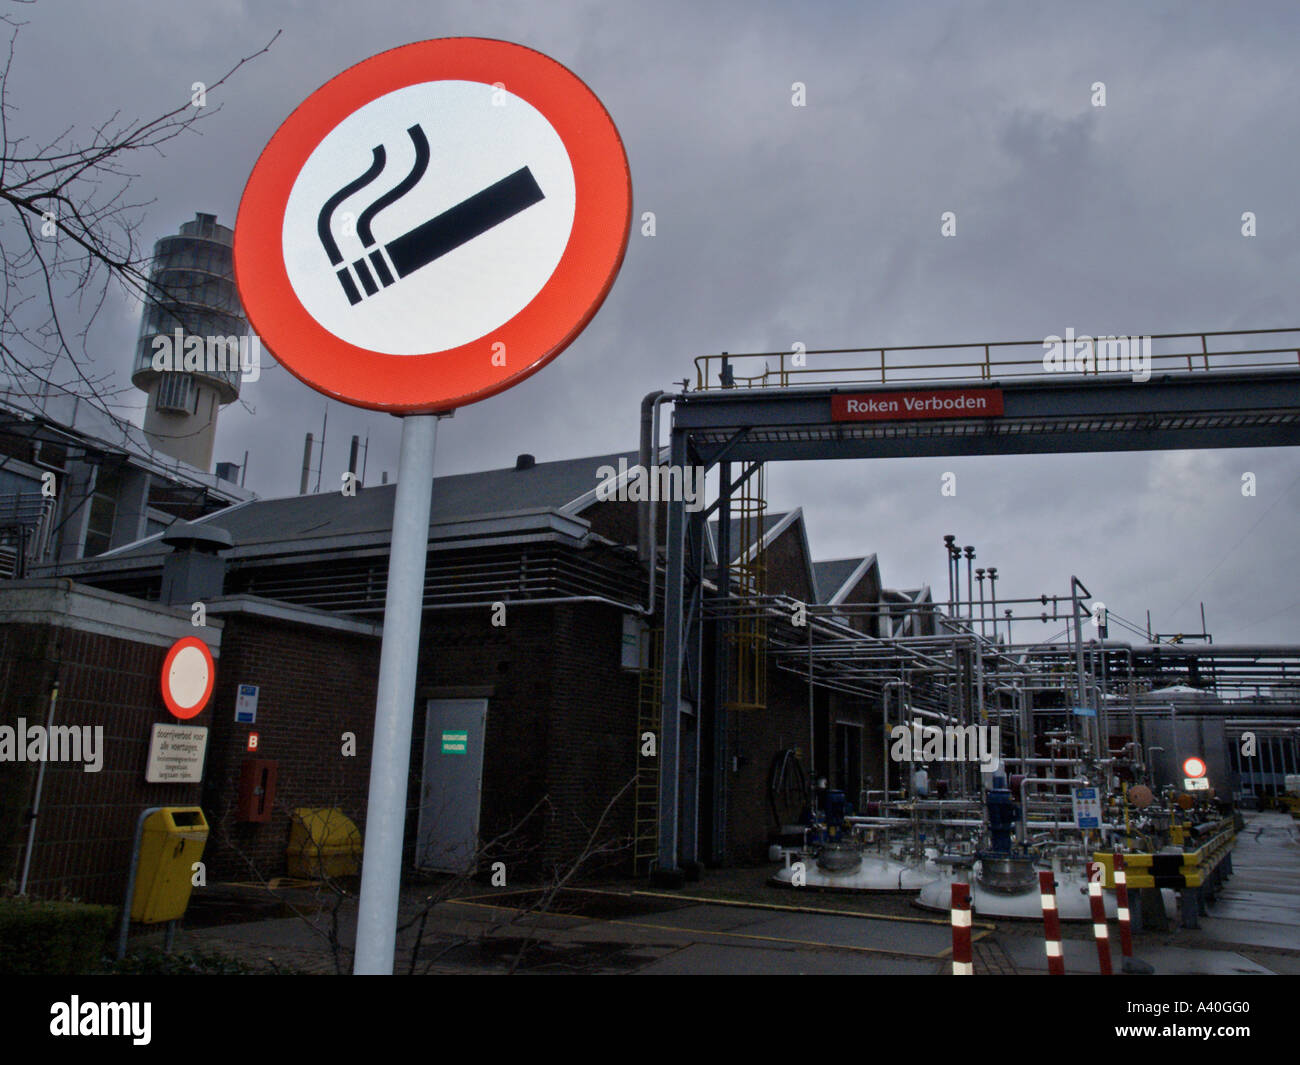 No smoking sign at chemical plant Oss the Netherlands Stock Photo